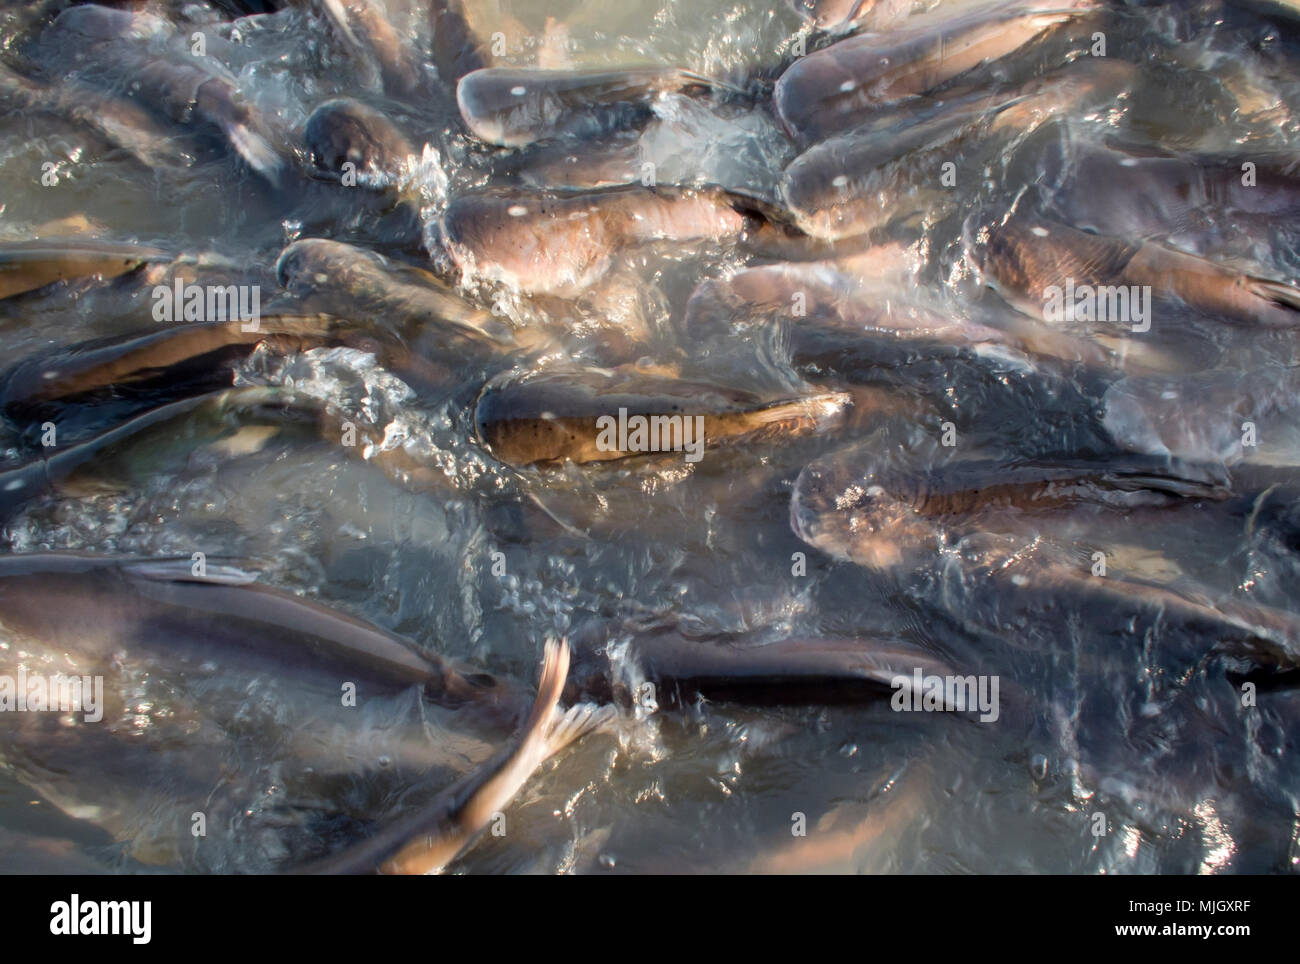 Many fish in pond. Scientific name for those fish is ' Pangasius hypophthalmus' or 'Pangasiidae' Stock Photo